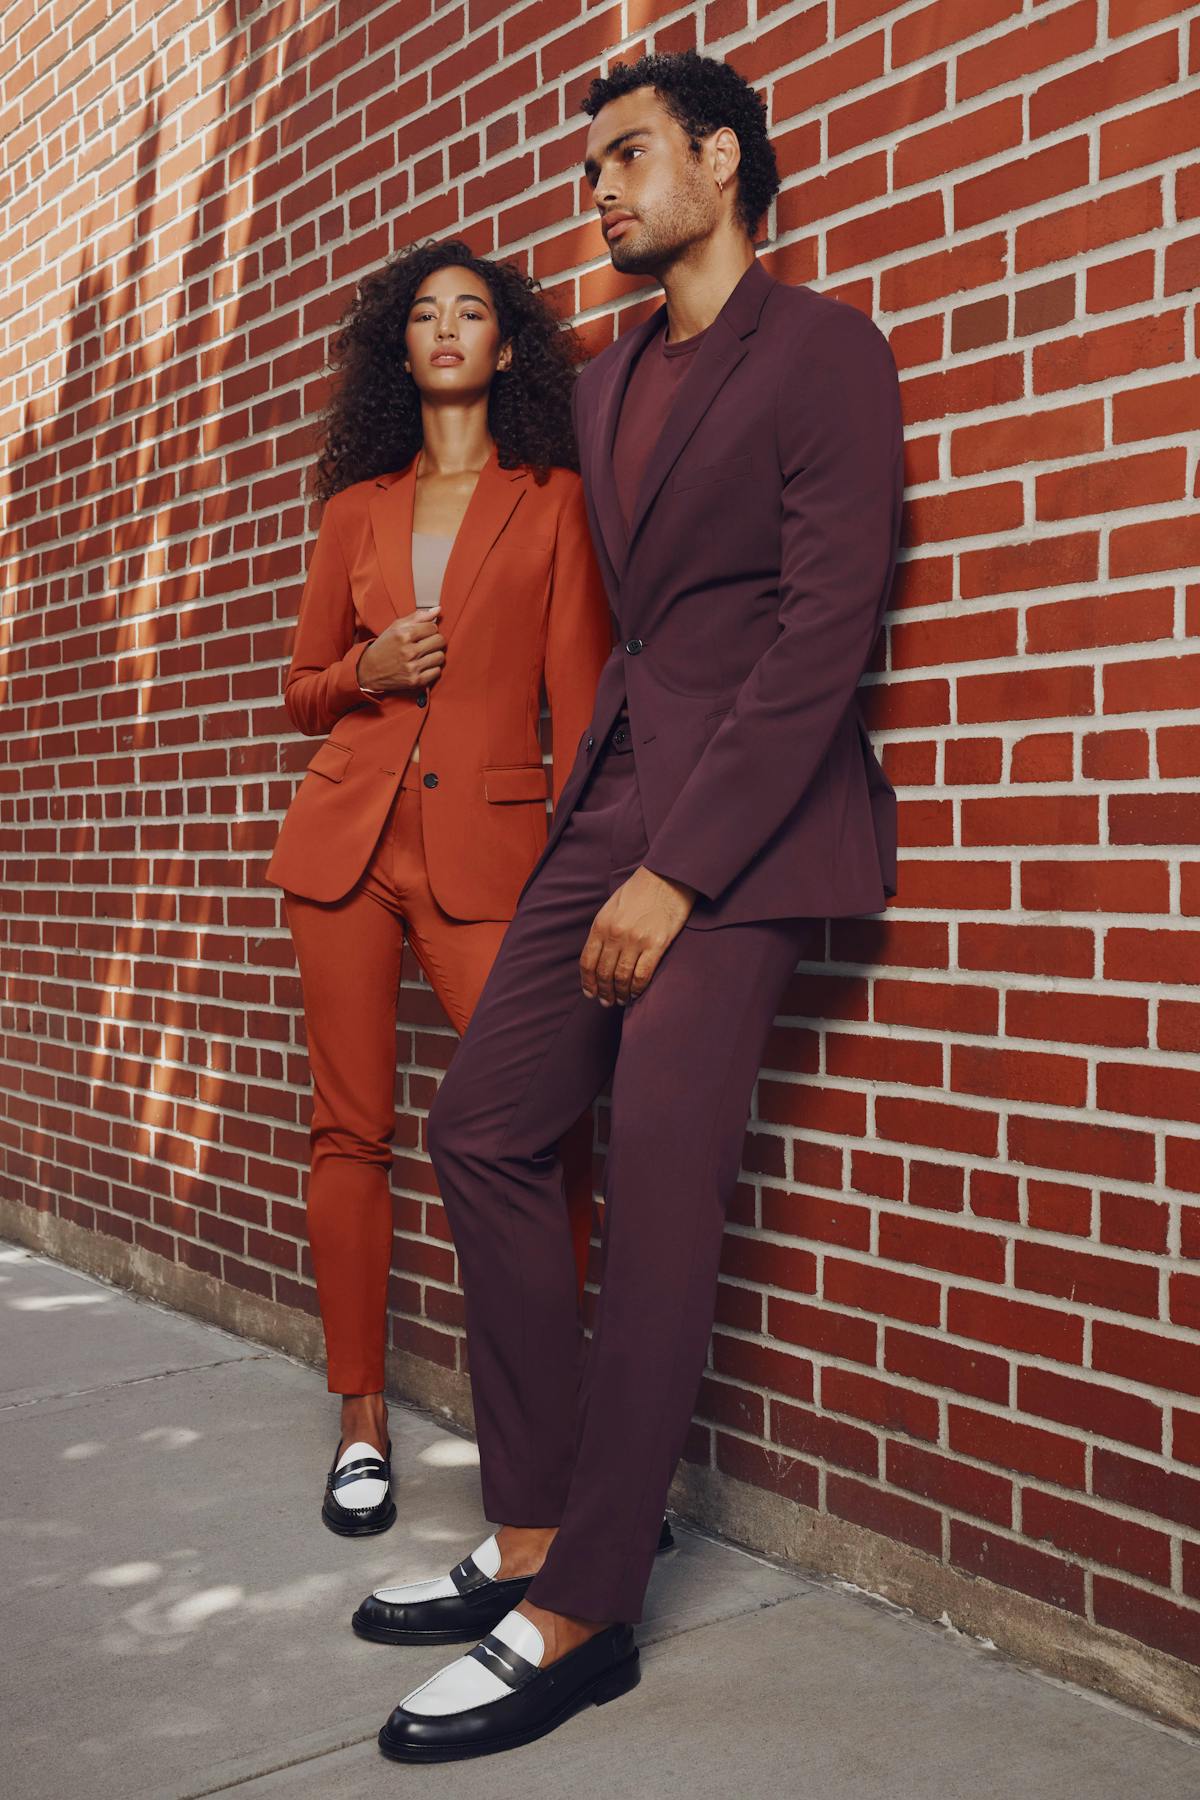 Monochrome suit outfits with simple styling in a women's burnt orange suit and a men's burgundy suit against a brick wall.